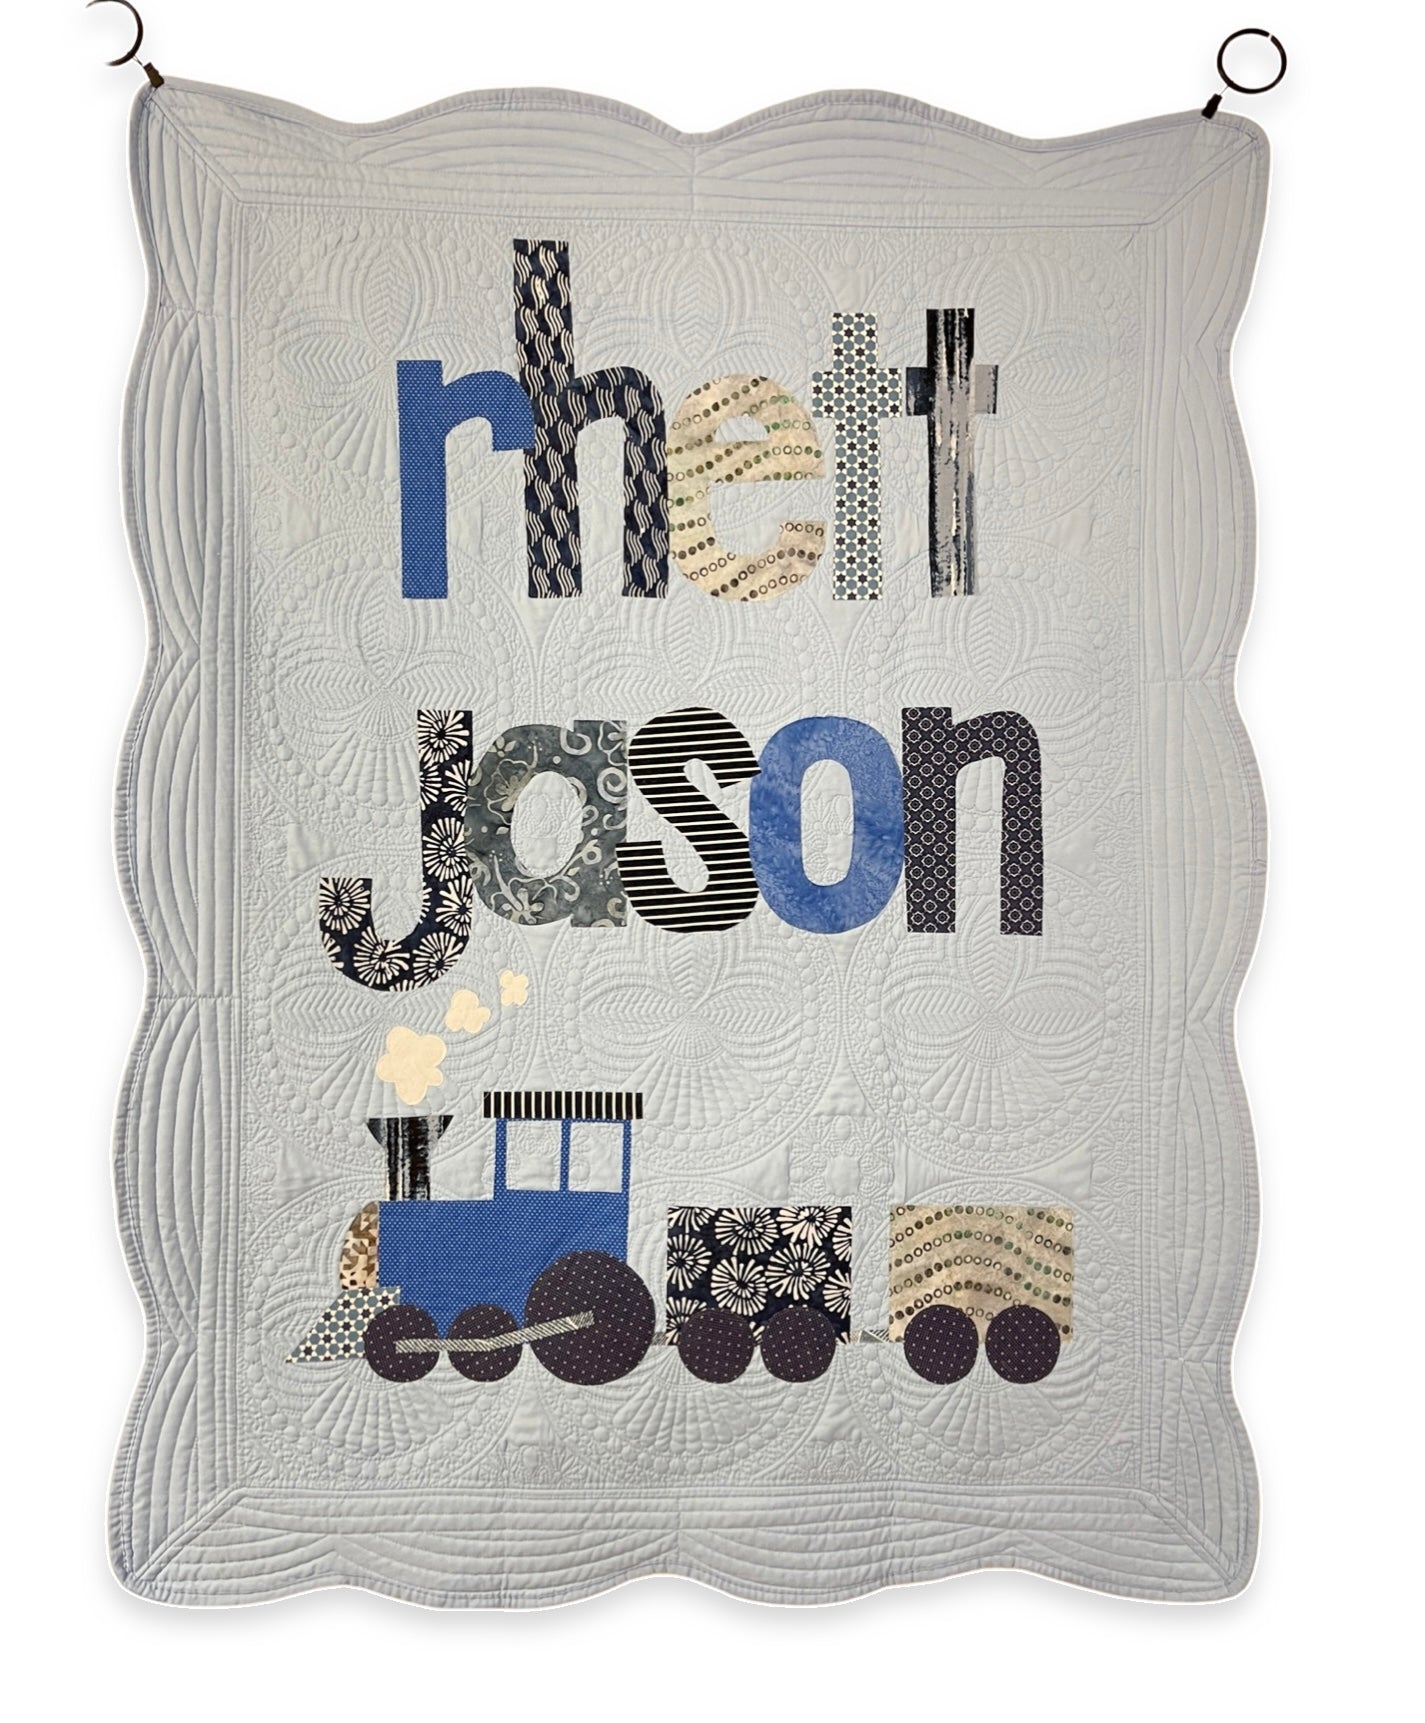 Train Personalized Baby Quilt